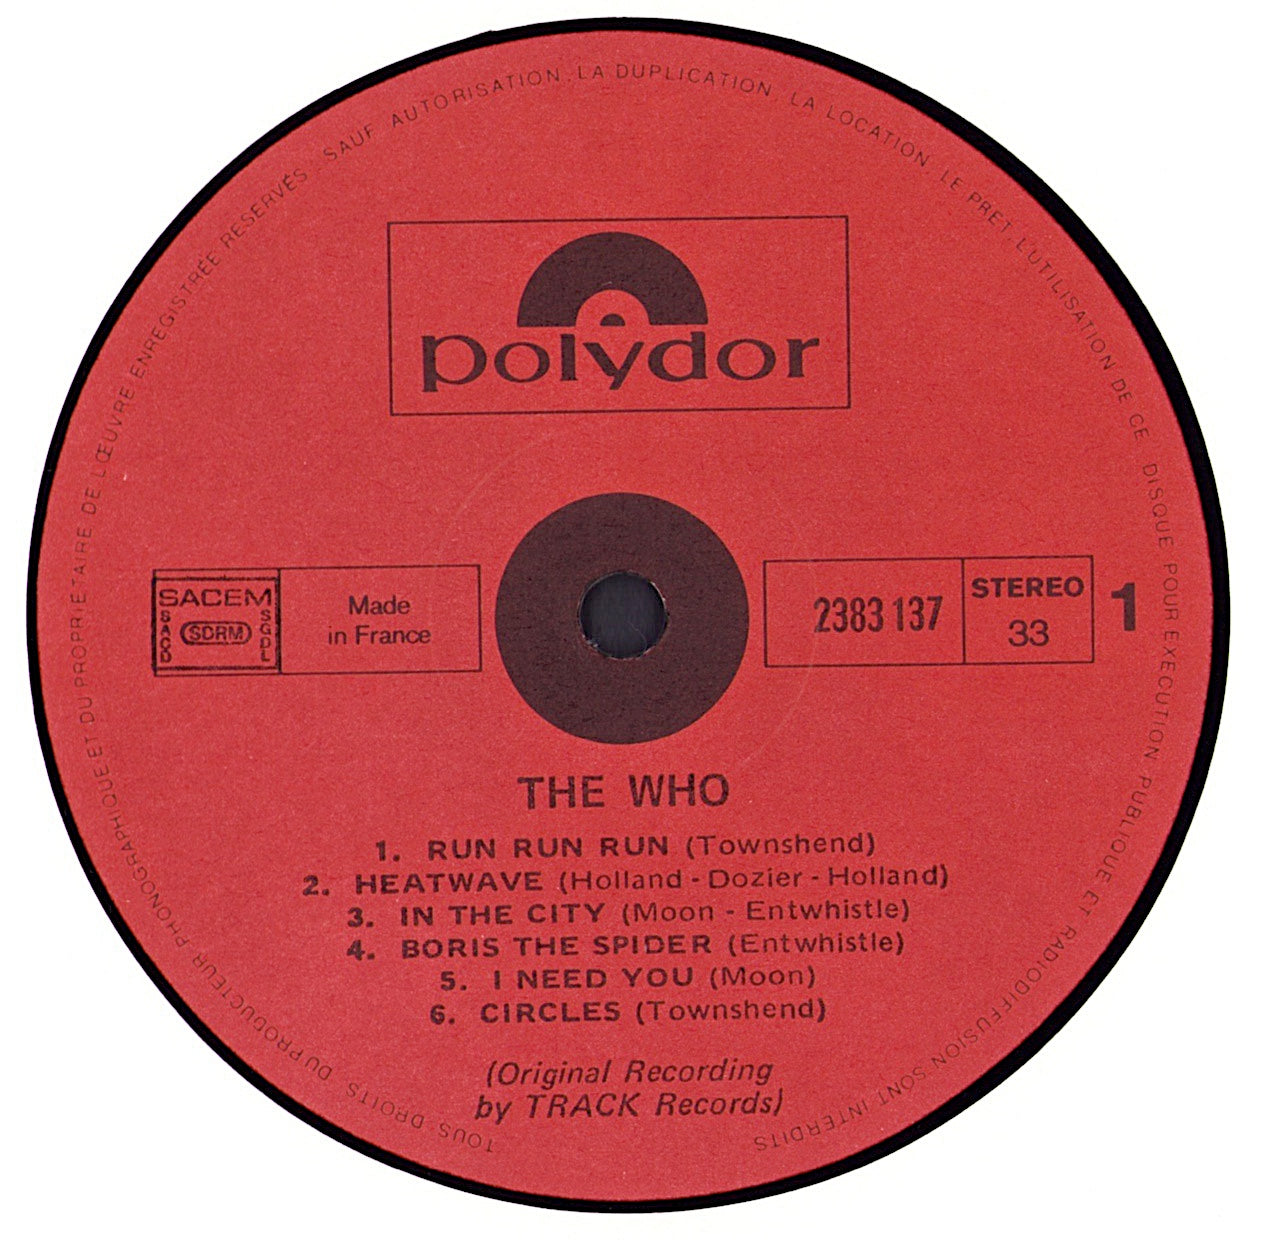 The Who - The Who Vinyl LP FR